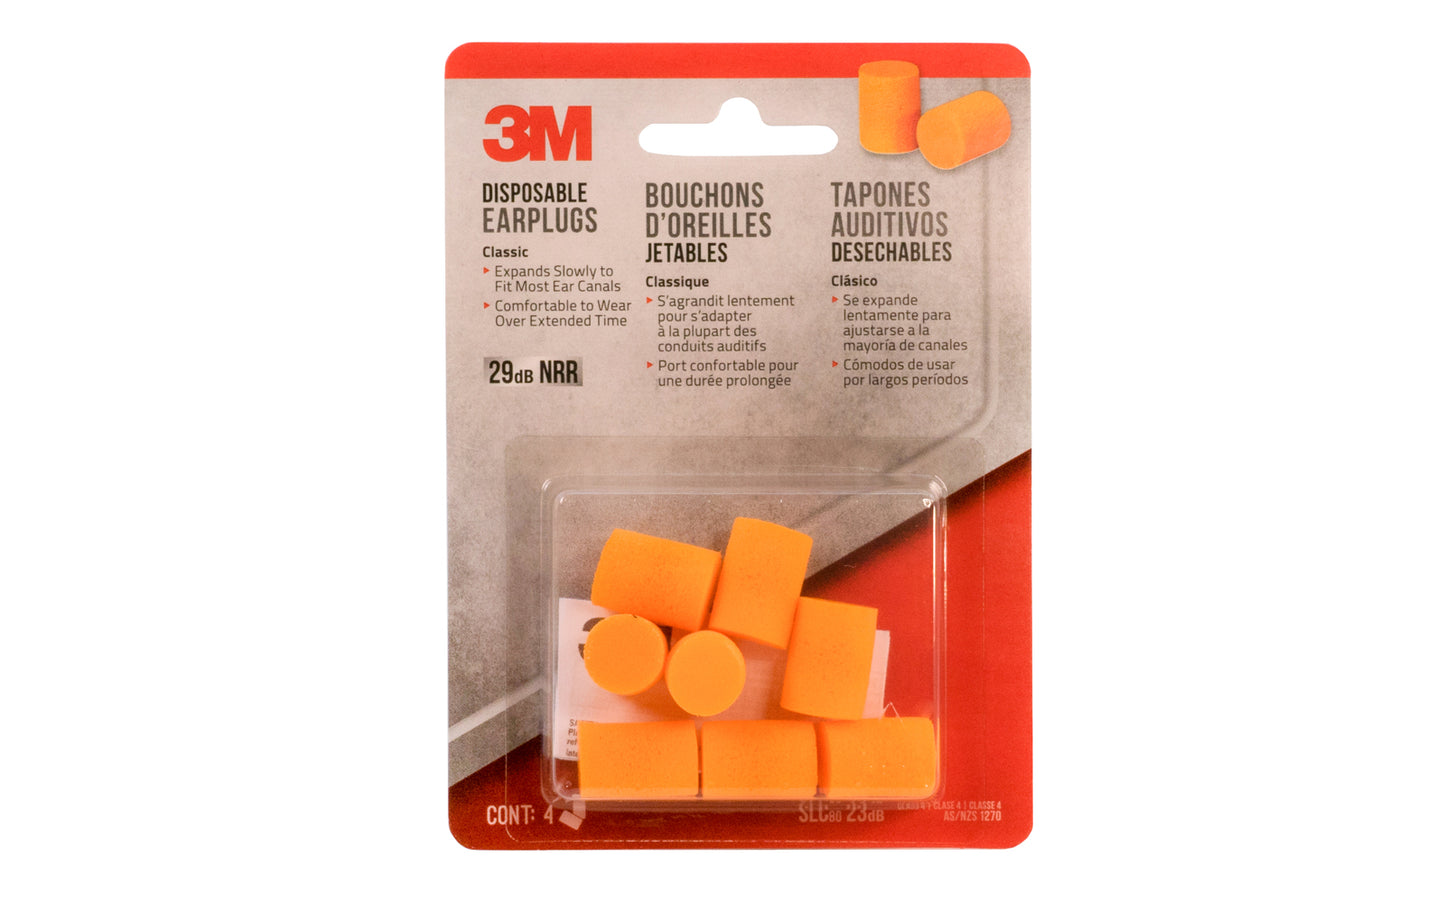 3M Disposable Earplugs ~ Designed with a smooth & soft foam formulation. Disposable & lightweight, 3M Disposable Earplugs are a great choice in hearing protection for both the DIYer & the professional. Noise Reduction Rating (NRR) of 29 dB. Fits wide range of ear canals. 4 pair. Model No. 90580. 078371905804.